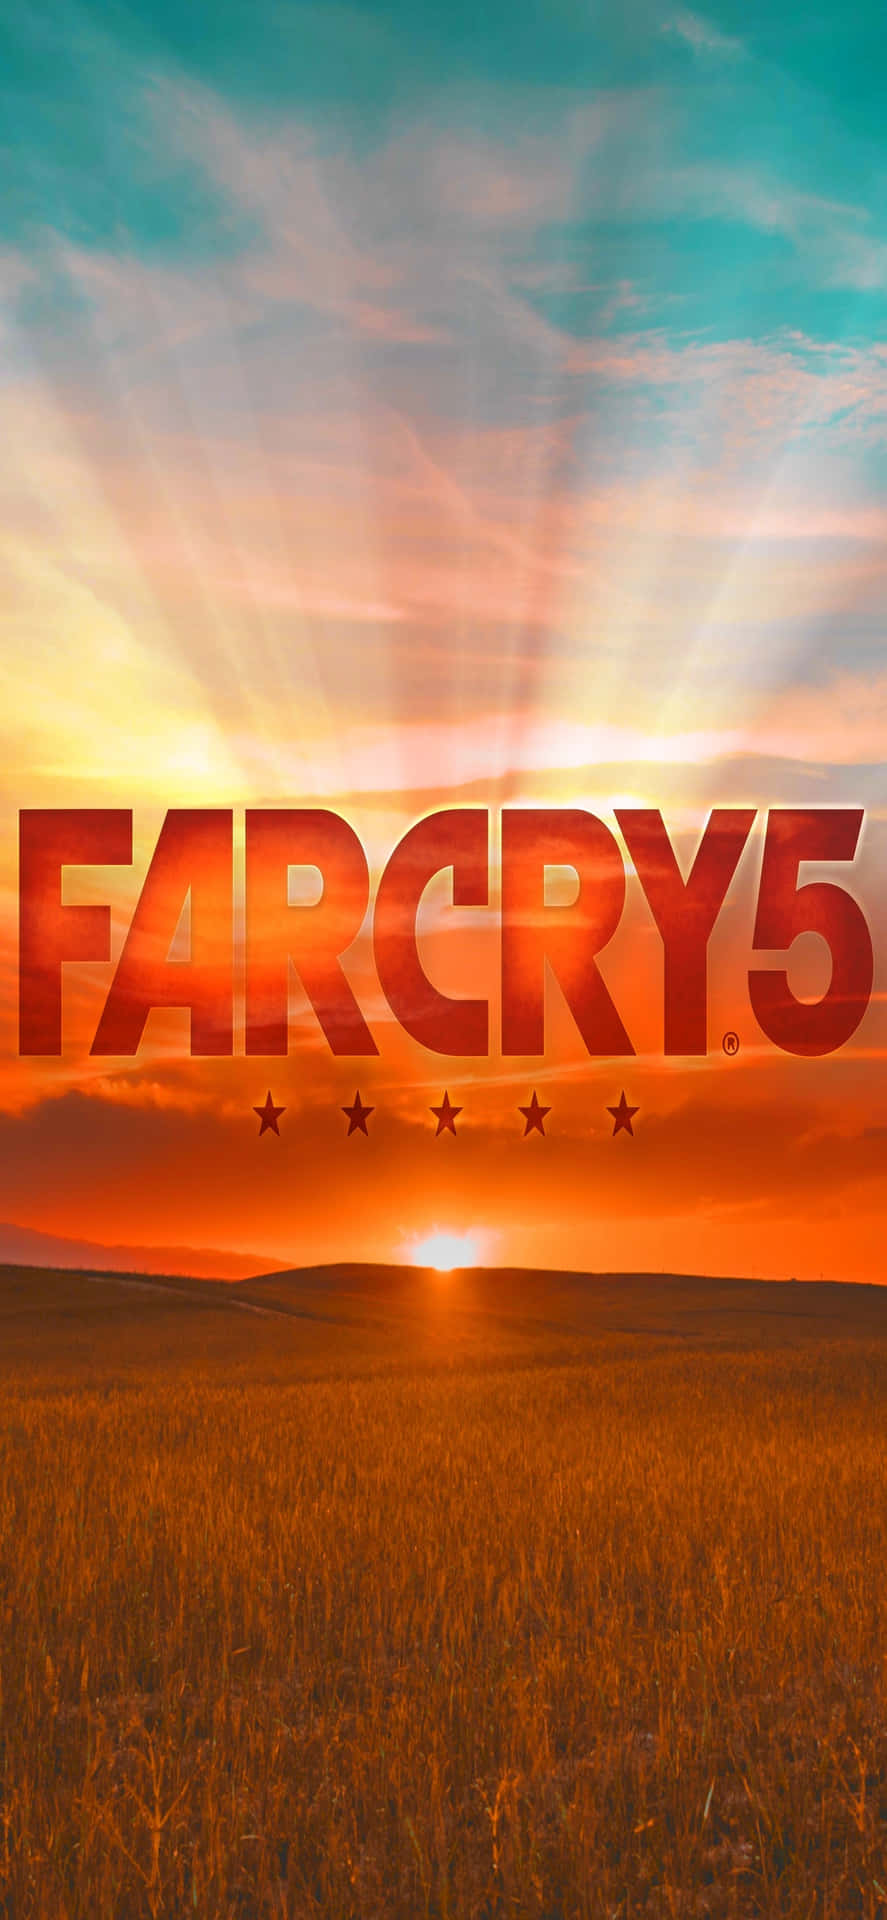 Enjoy the action-adventure game Far Cry 5 on your iPhone XS